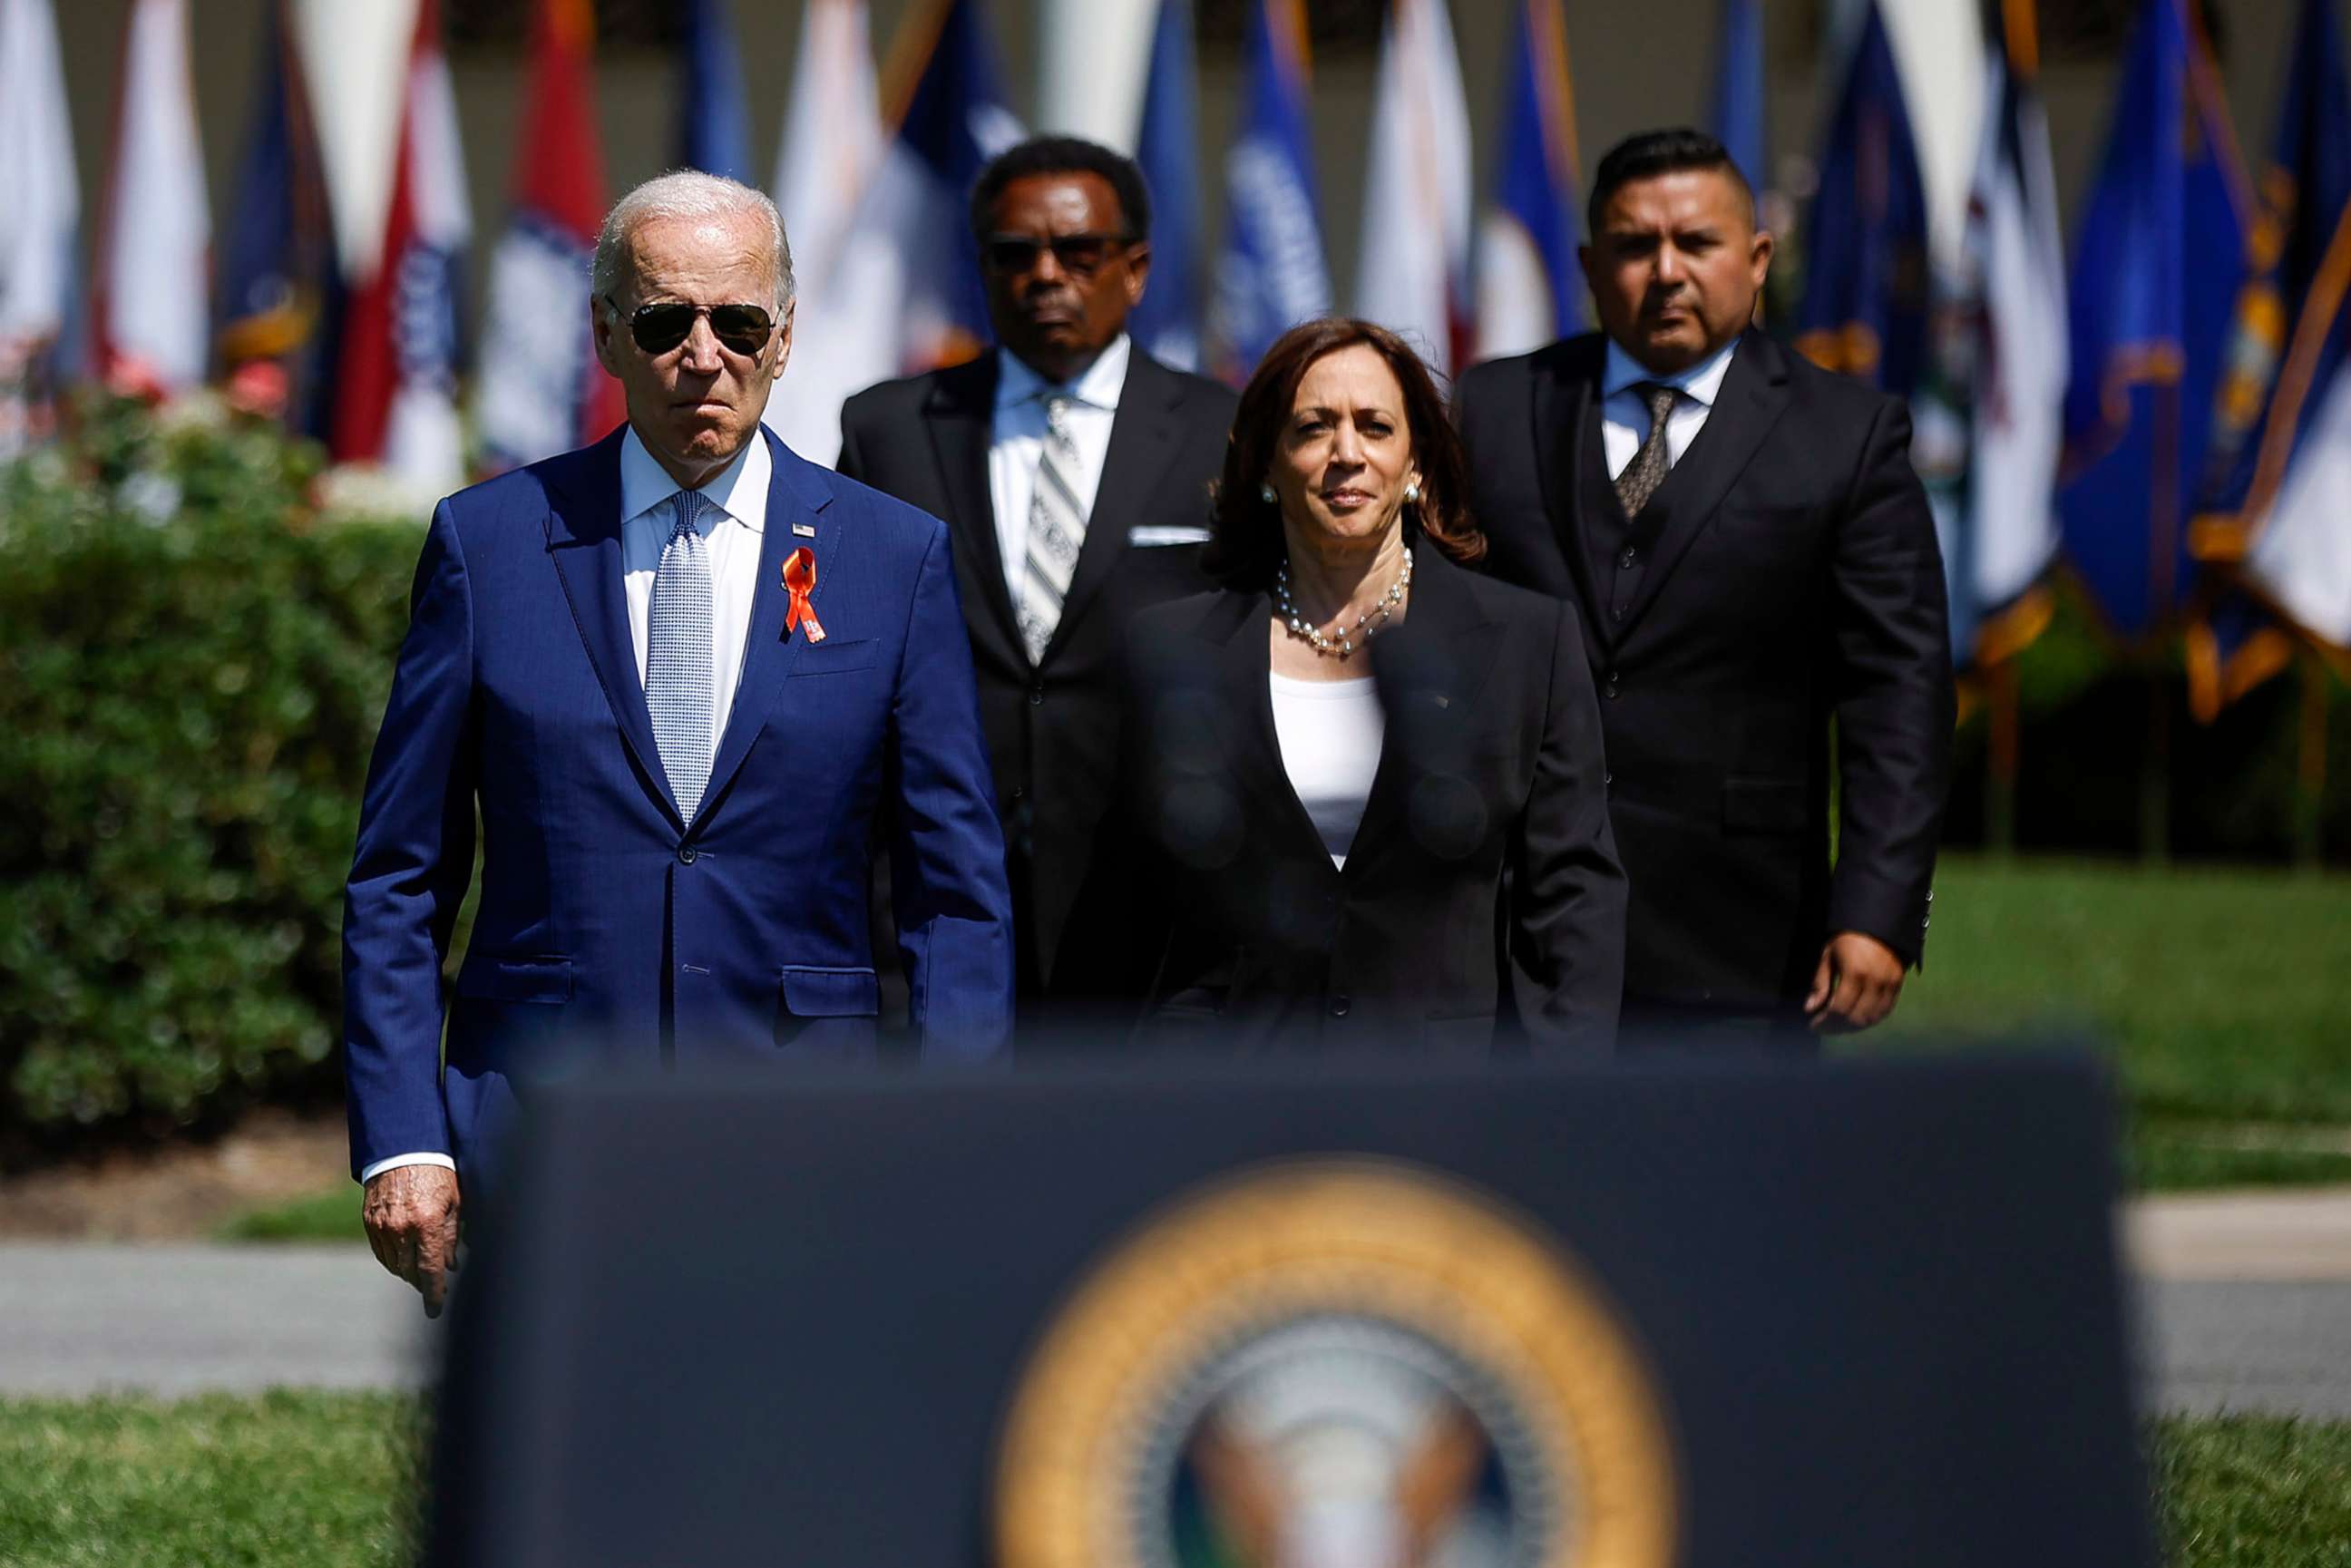 PHOTO: President Joe Biden, Garnell Whitfield Jr., Vice President Kamala Harris and Dr. Dr. Roy Guerrero arrive for an event to celebrate the Bipartisan Safer Communities Act on the South Lawn of the White House, July 11, 2022.